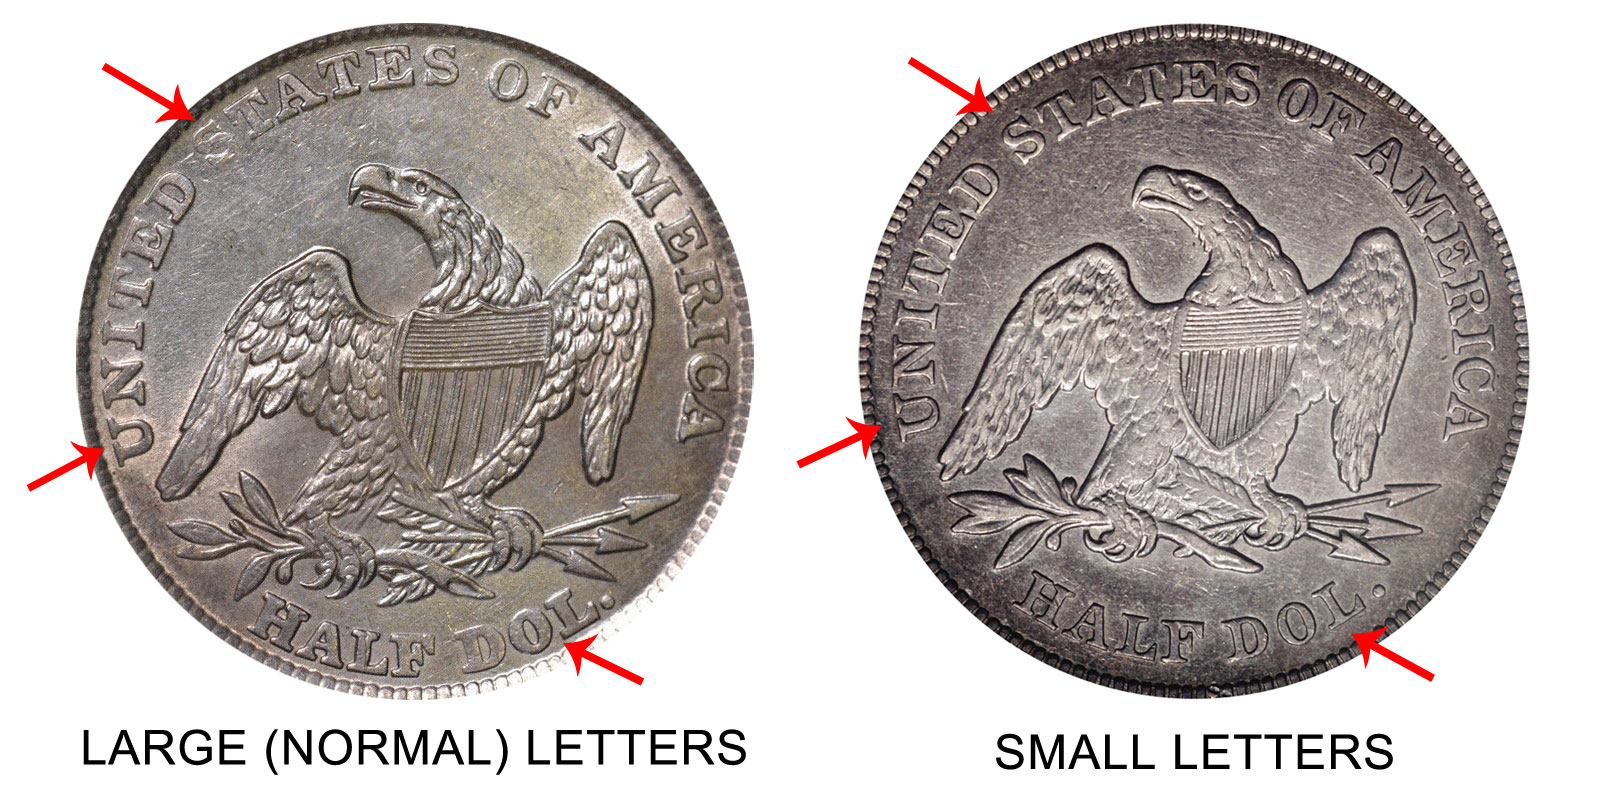 1839-large-normal-letters-vs-small-letters-capped-bust-half-dollar.jpg